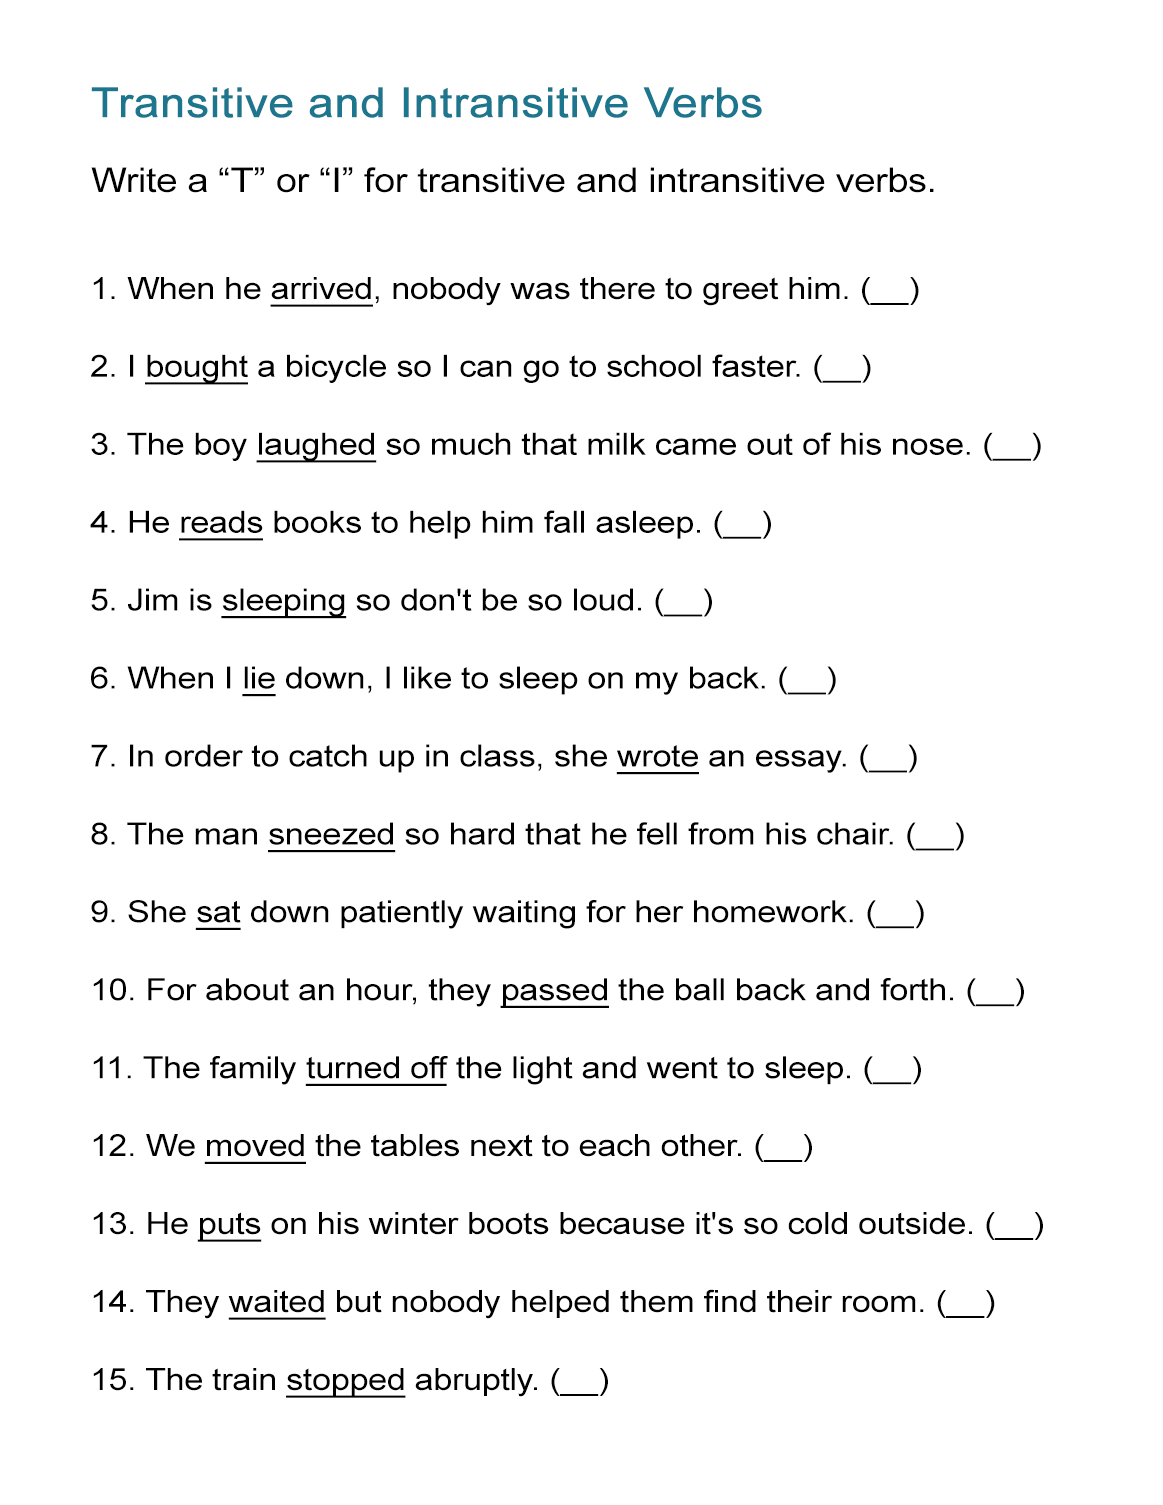 transitive-and-intransitive-verbs-online-worksheet-for-grade-8-in-2021-transitive-and